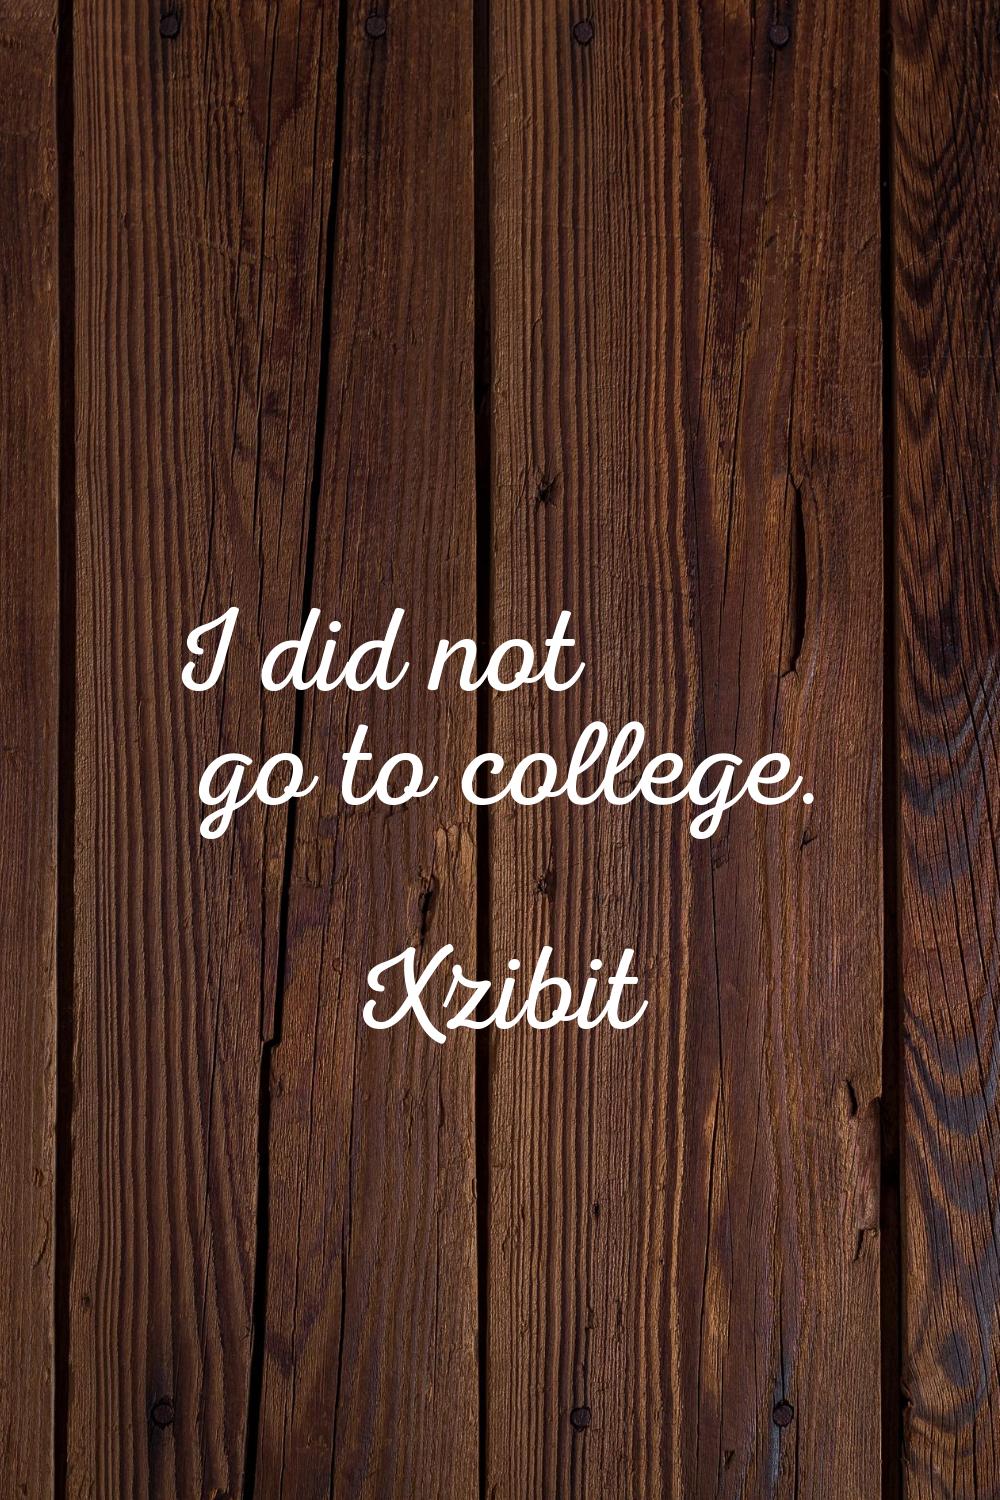 I did not go to college.